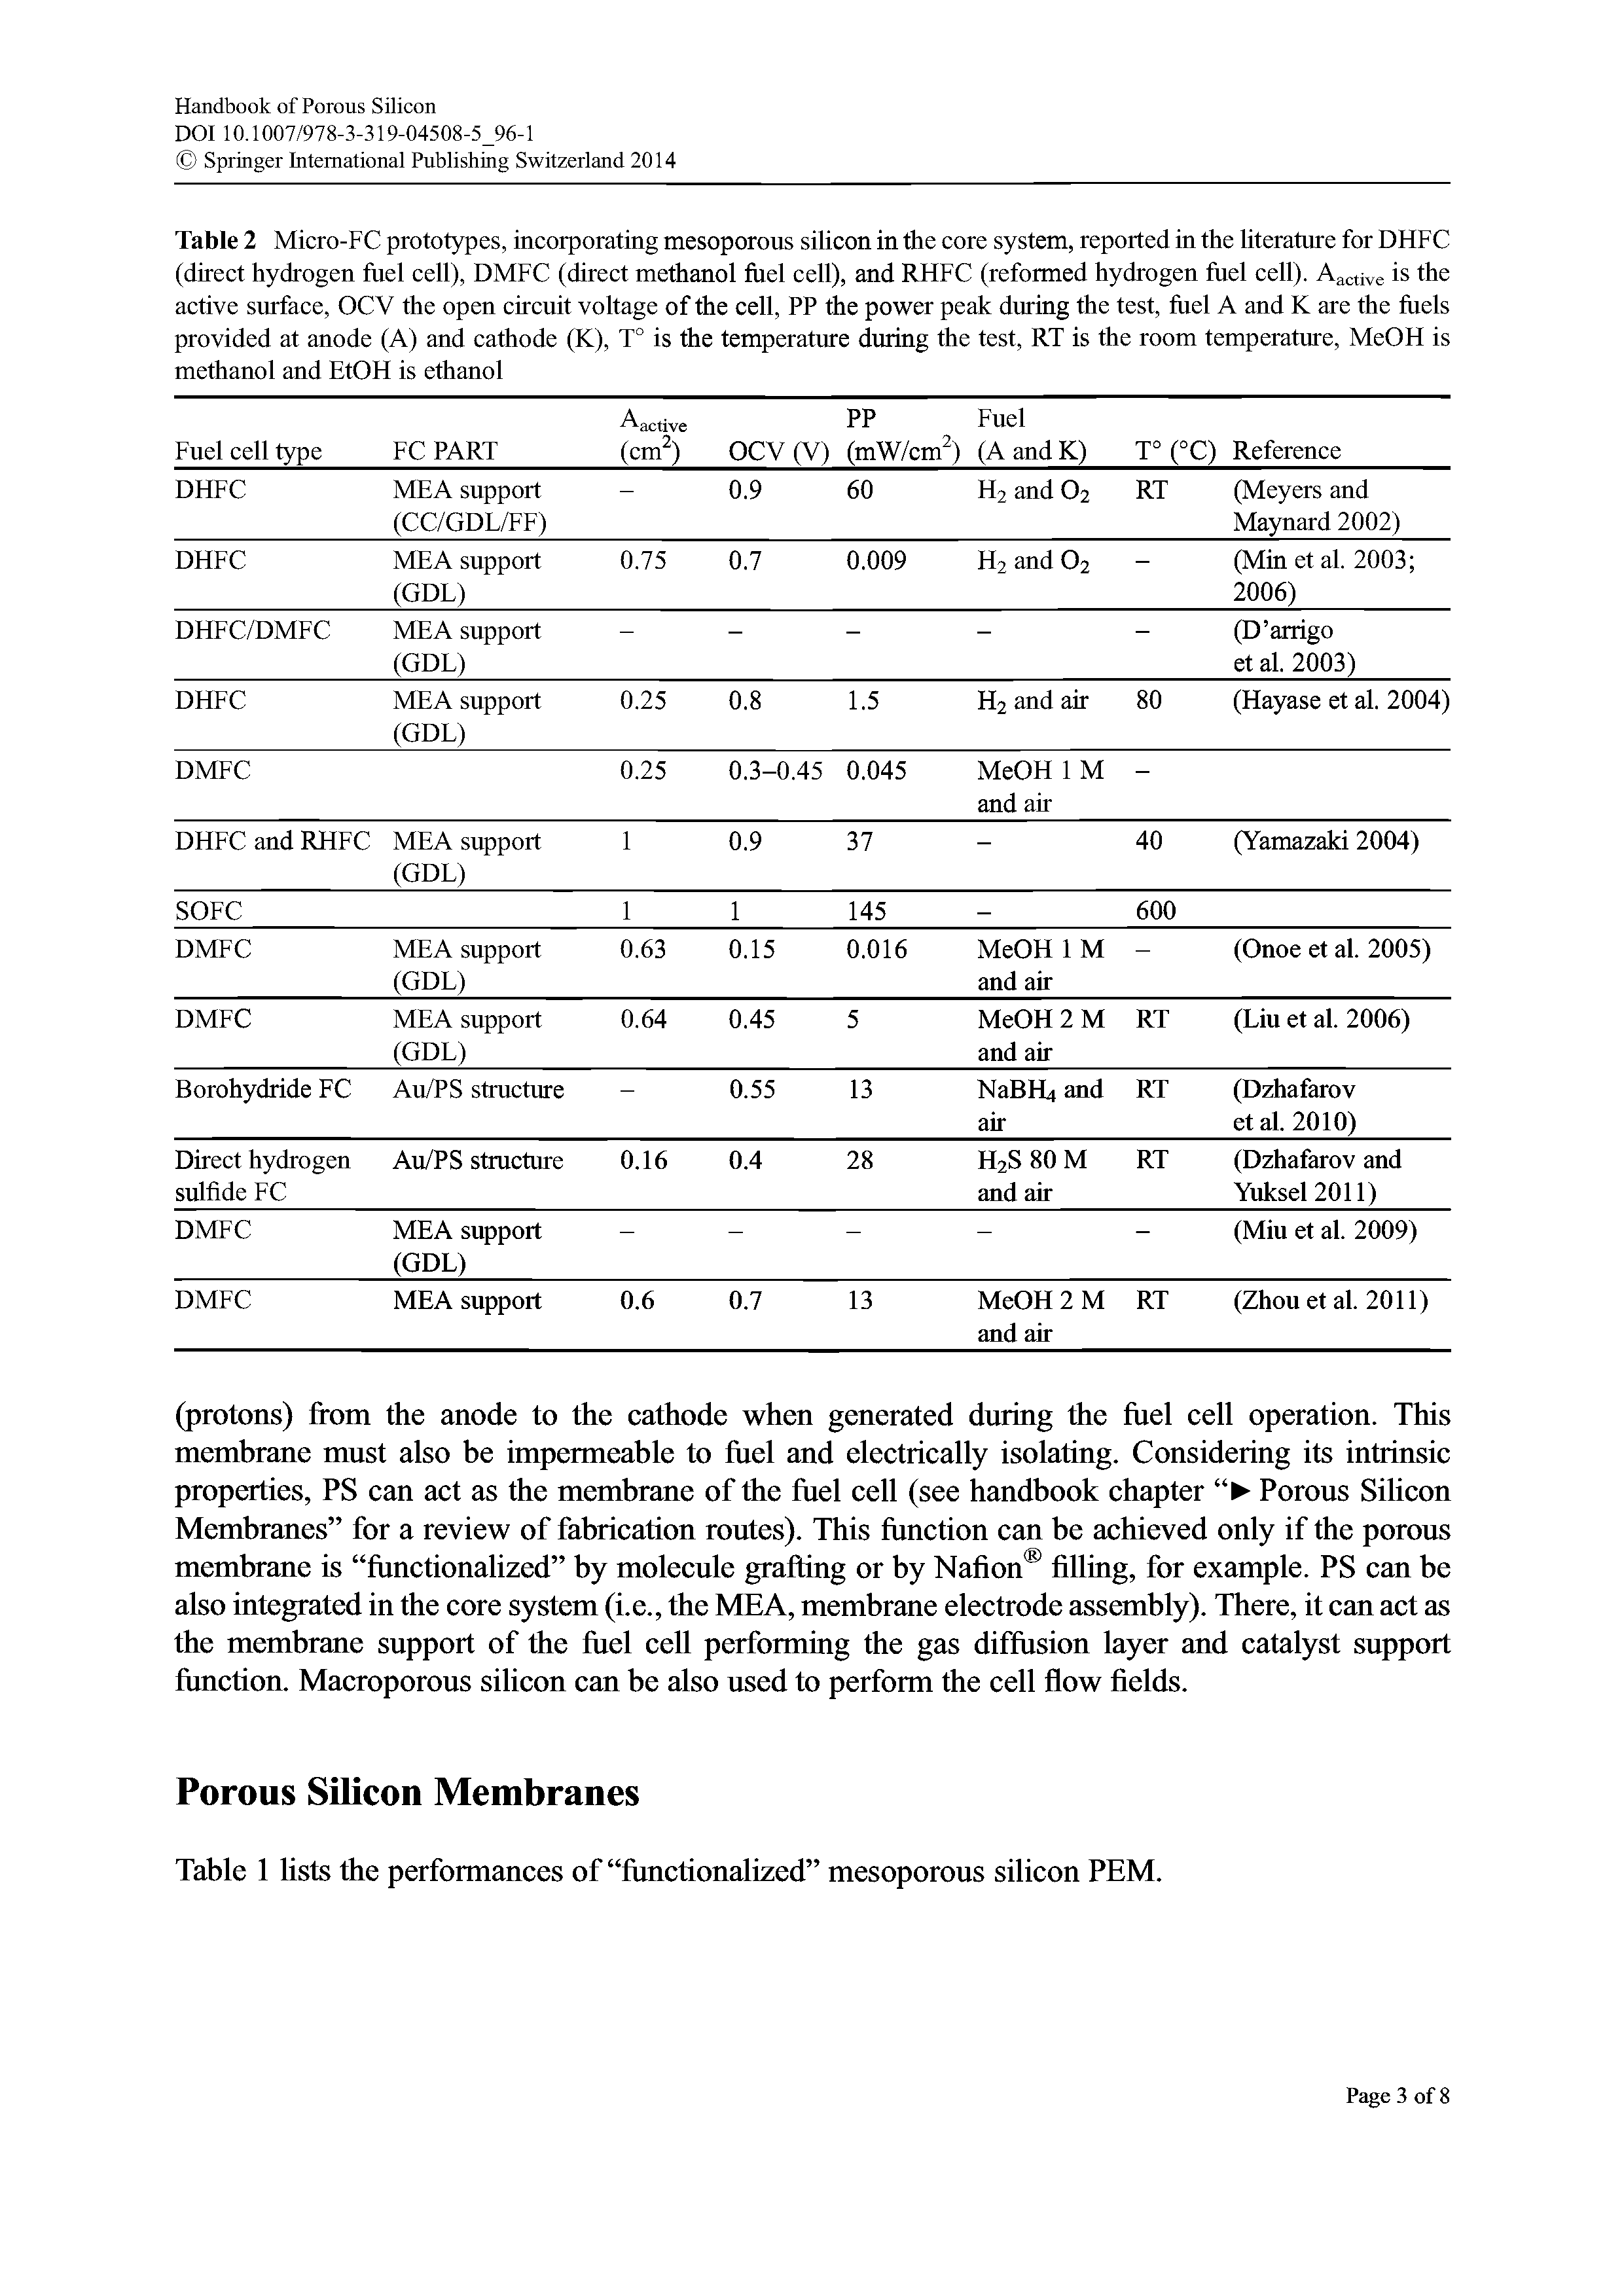 Table 2 Micro-FC prototypes, incorporating mesoporous silicon in the core system, reported in the hterature for DHFC (direct hydrogen fuel cell), DMFC (direct methanol fuel cell), and RHFC (reformed hydrogen fuel cell). Aacttve is the active surface, OCV the open circuit voltage of the cell, PP the power peak during the test, fuel A and K are the fuels provided at anode (A) and cathode (K), T° is the temperature during the test, RT is the room temperature, MeOH is methanol and EtOFI is ethanol...